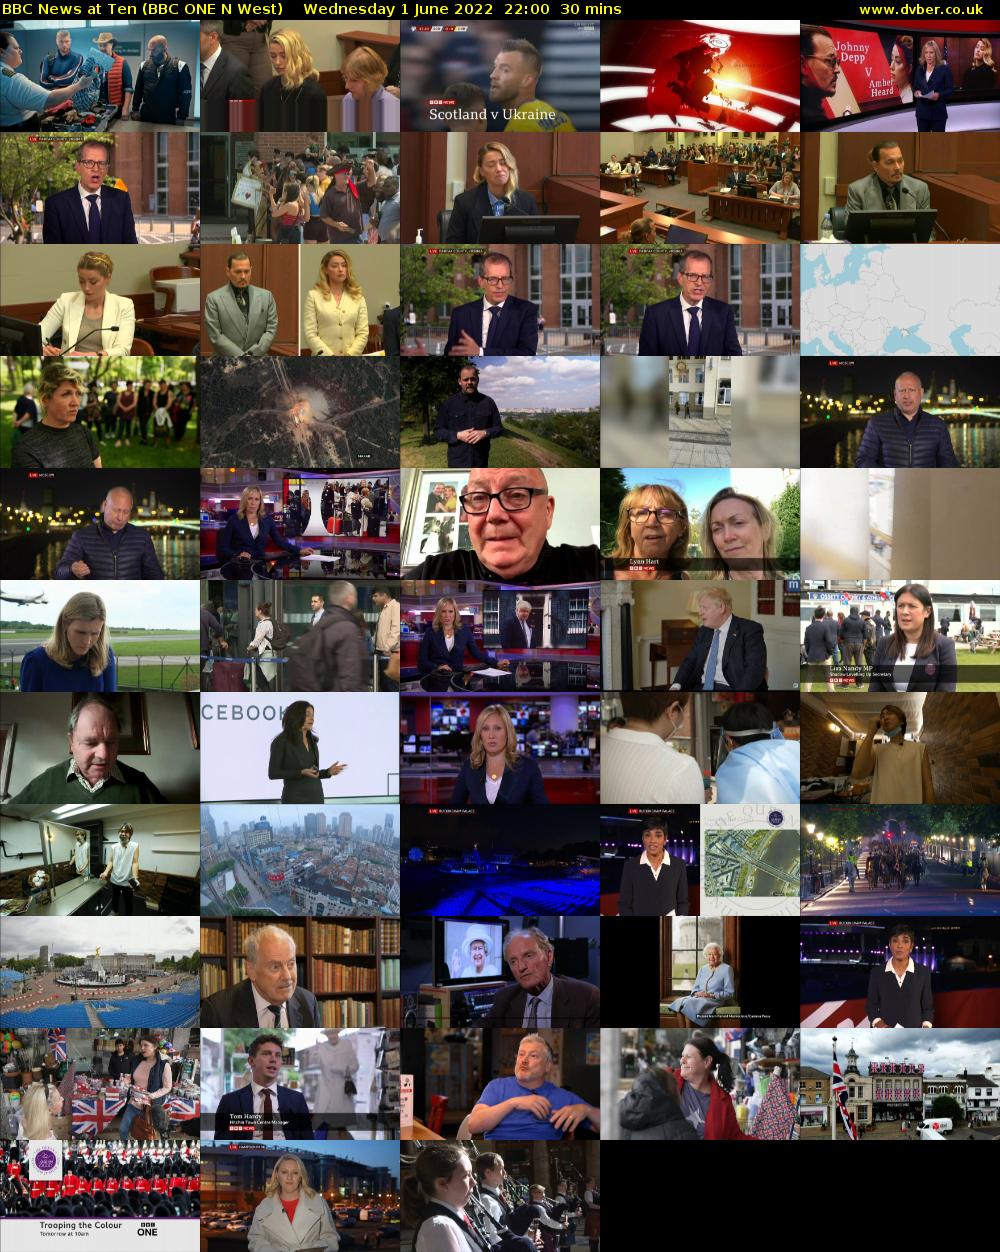 BBC News at Ten (BBC ONE N West) Wednesday 1 June 2022 22:00 - 22:30